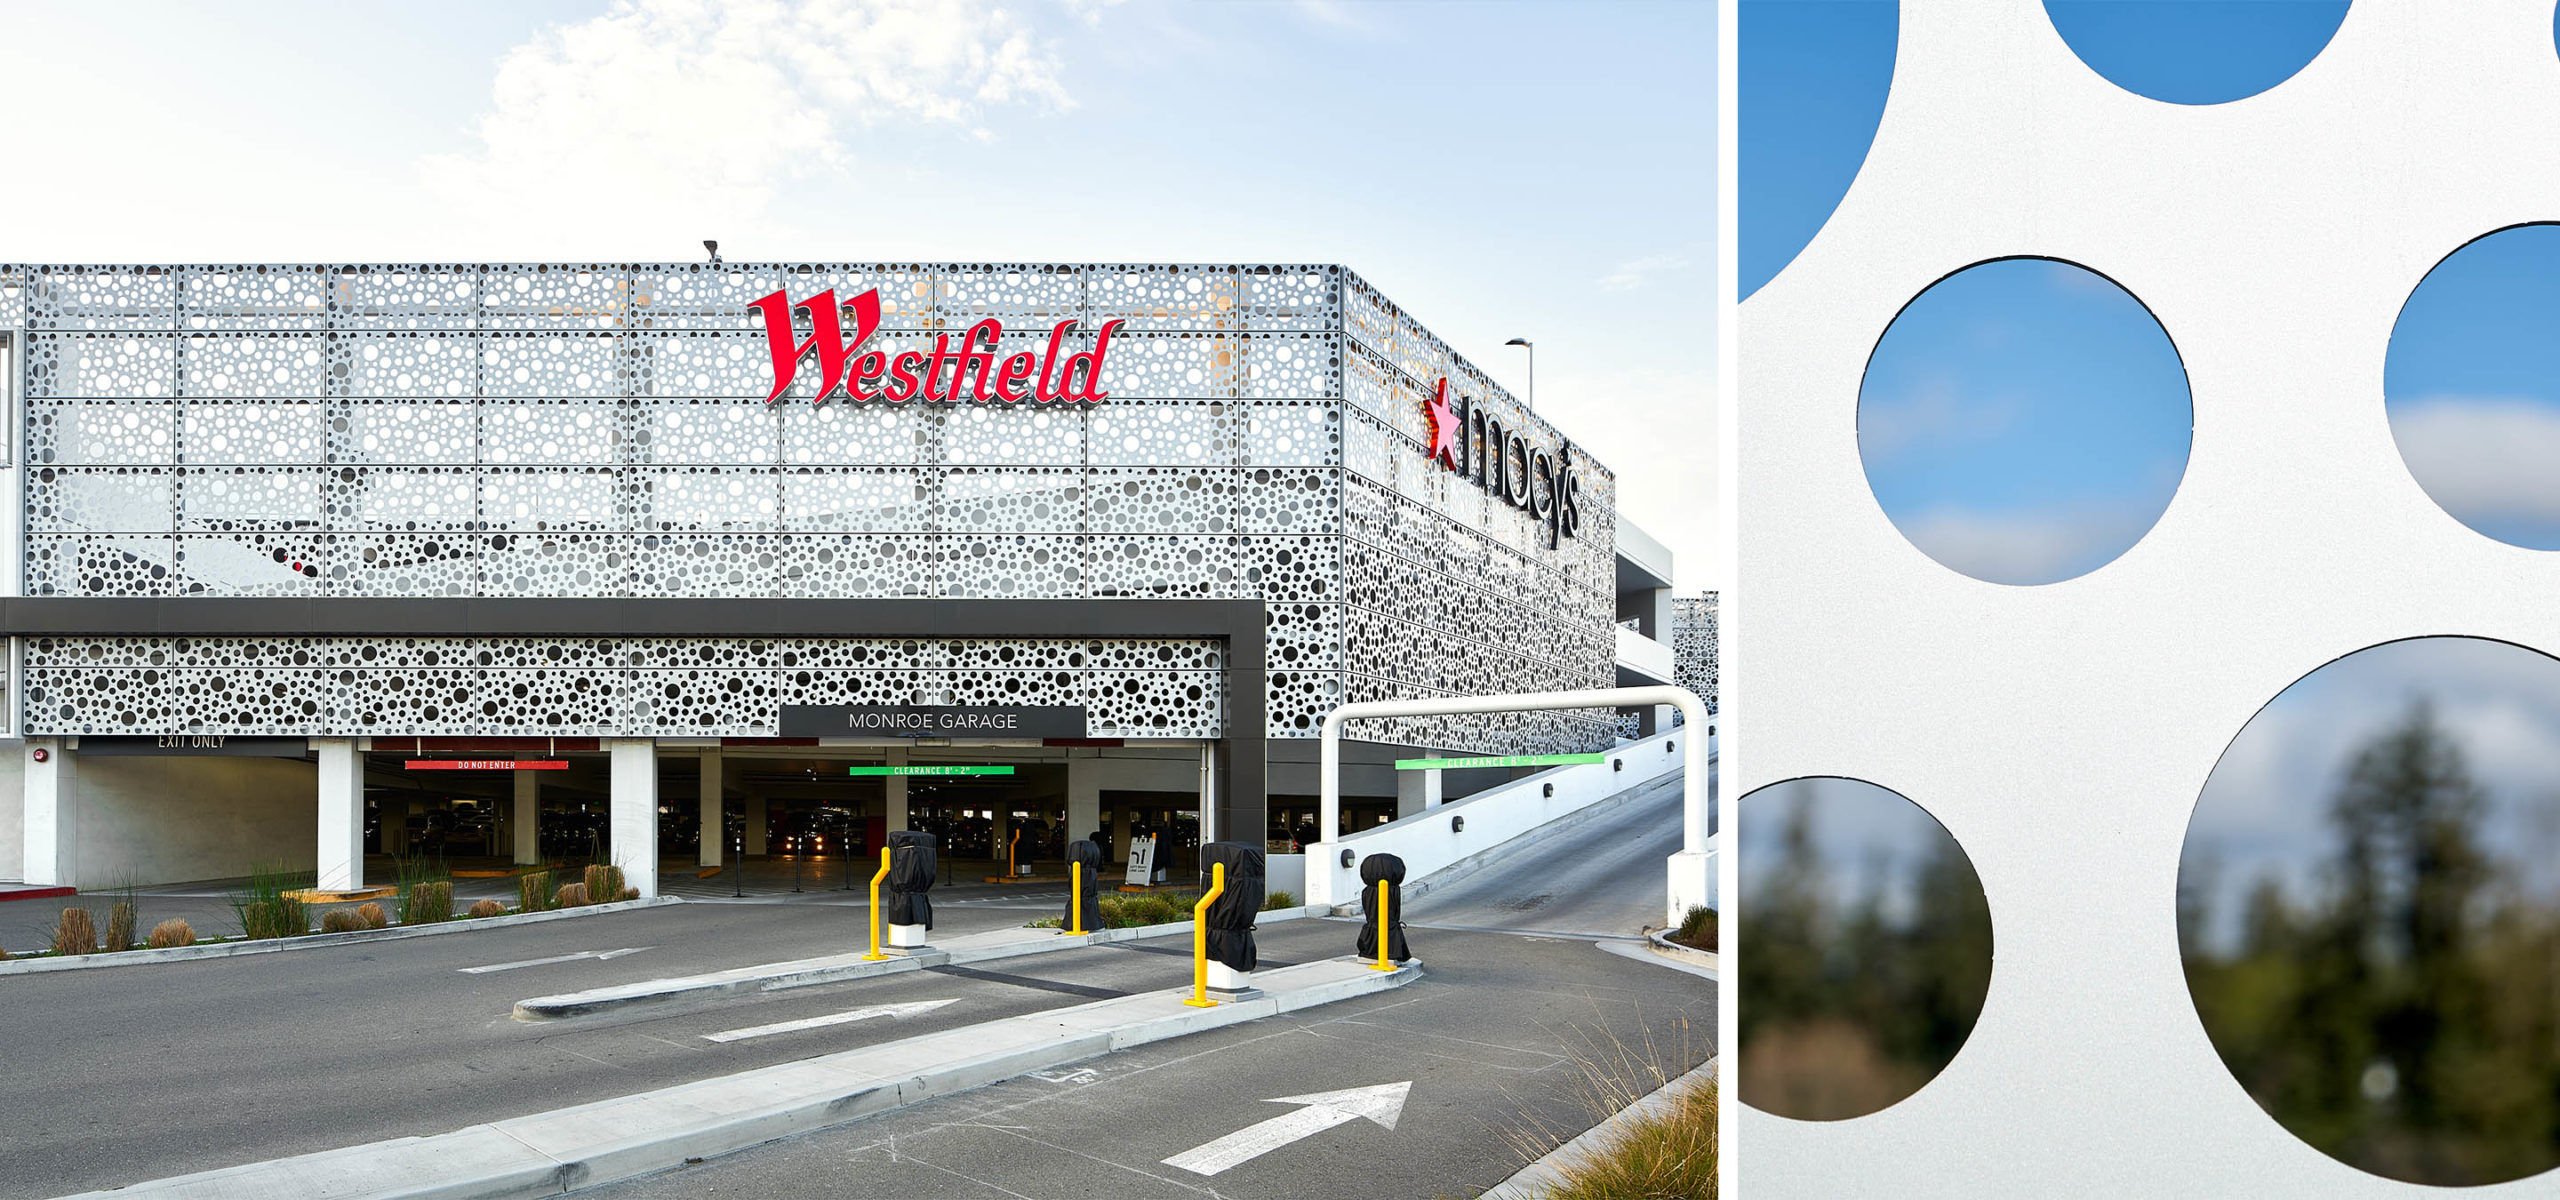 Project: The Westfield Valley Fair Podium and Garage Expansion